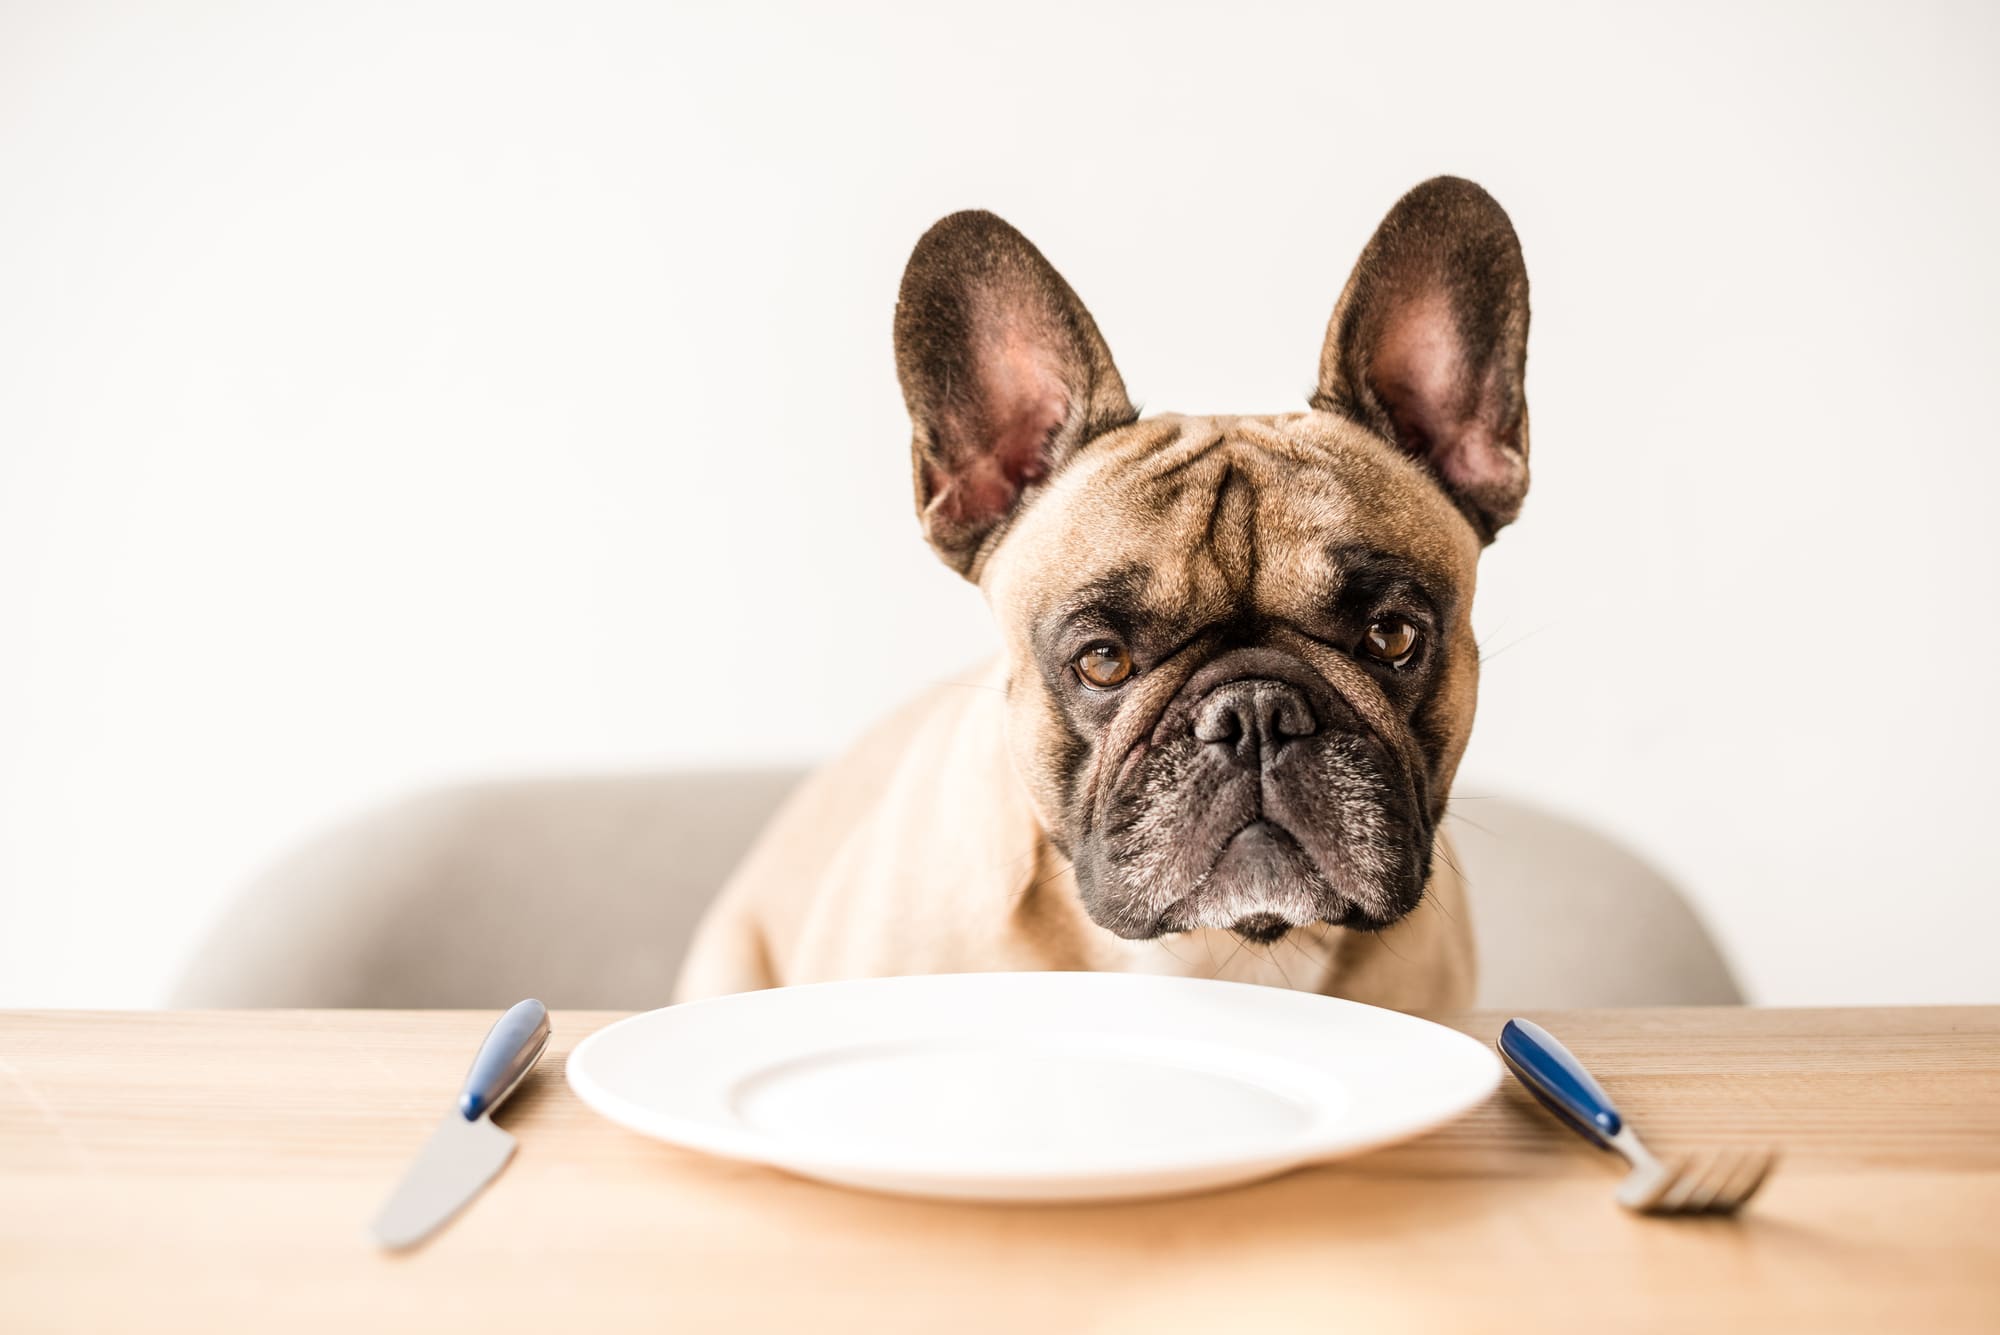 French bulldog in front of empty plate